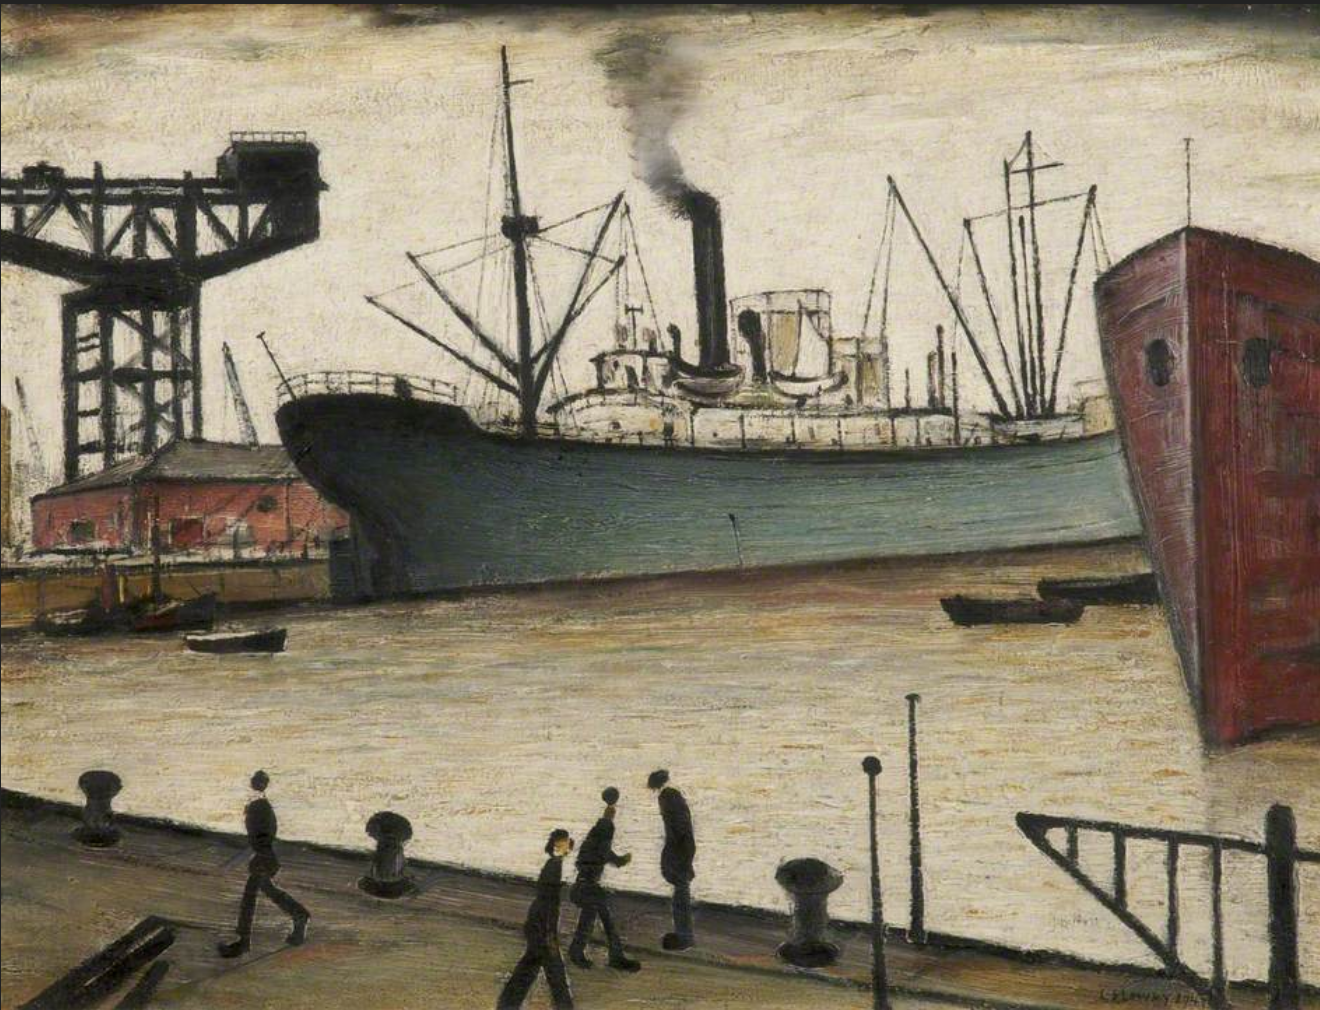 Queen's Dock, Glasgow (1947) by Laurence Stephen Lowry (1887 - 1976), English artist.